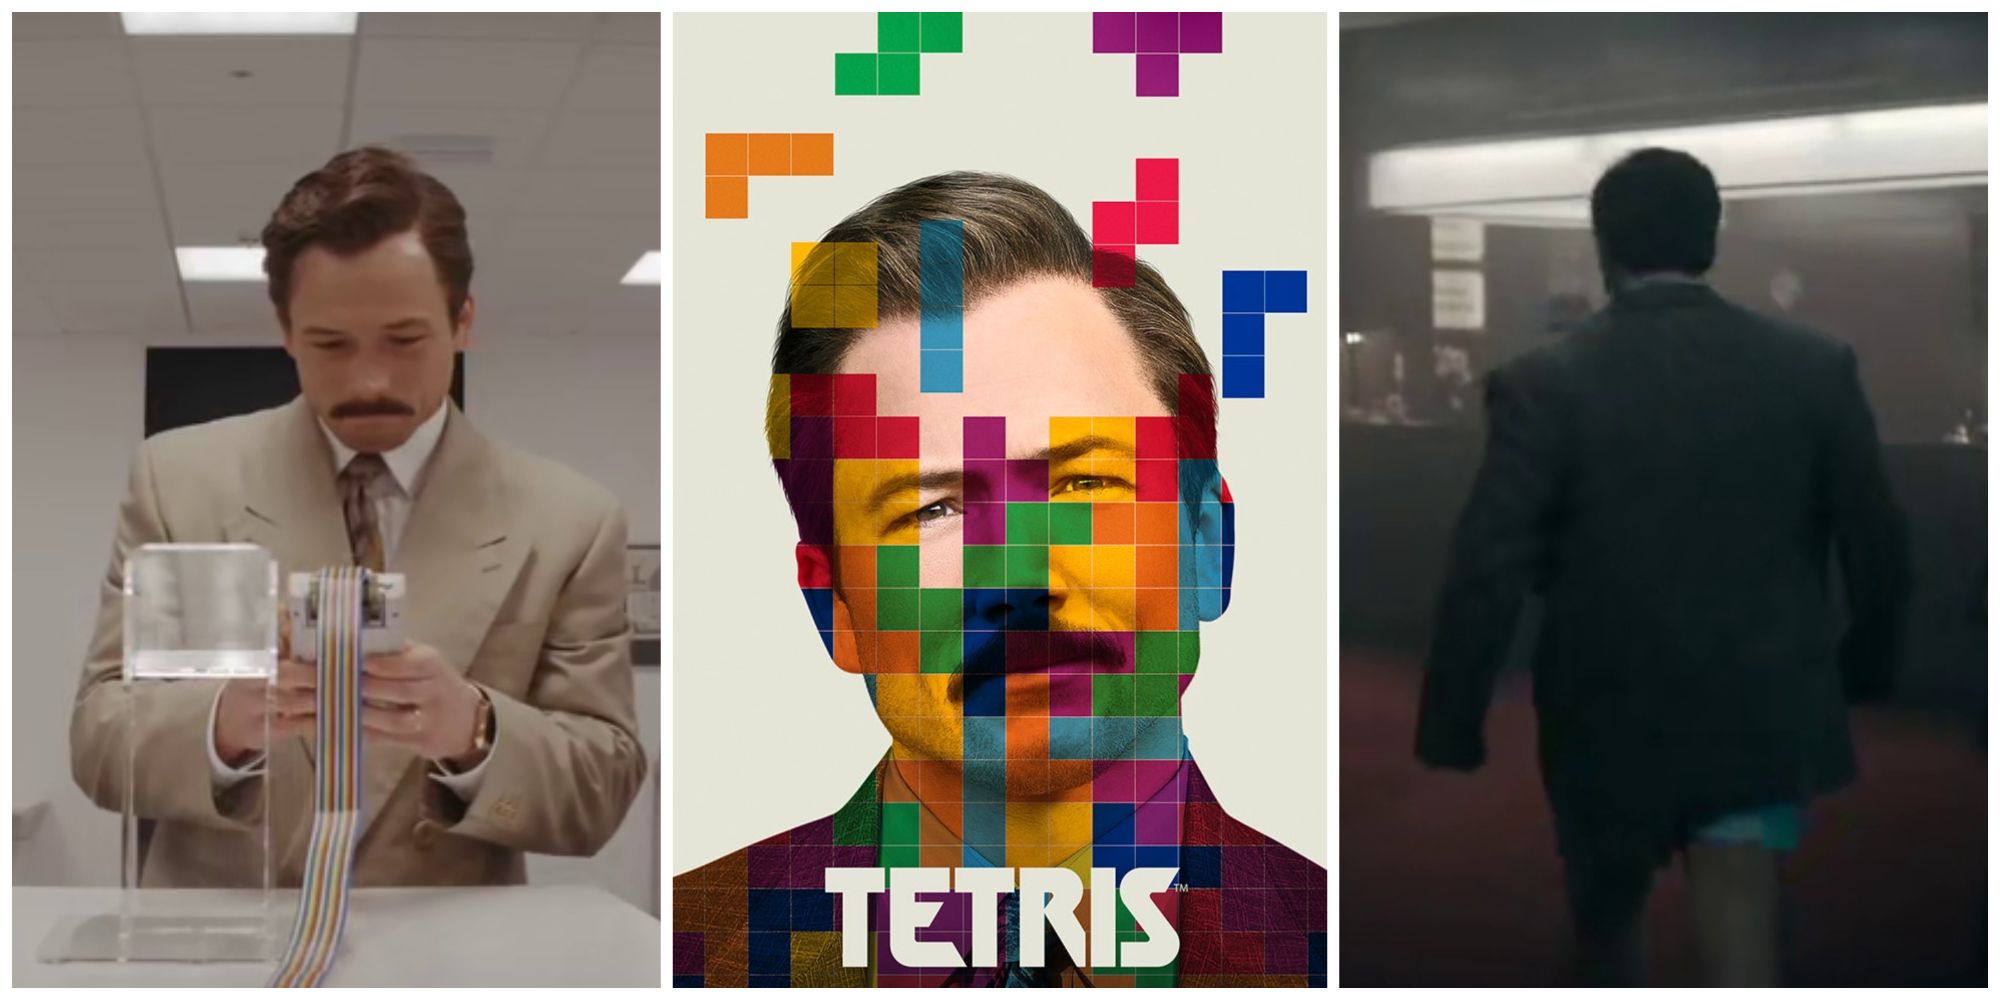 Henk in colorful background Tetris movie poster Henk without pants